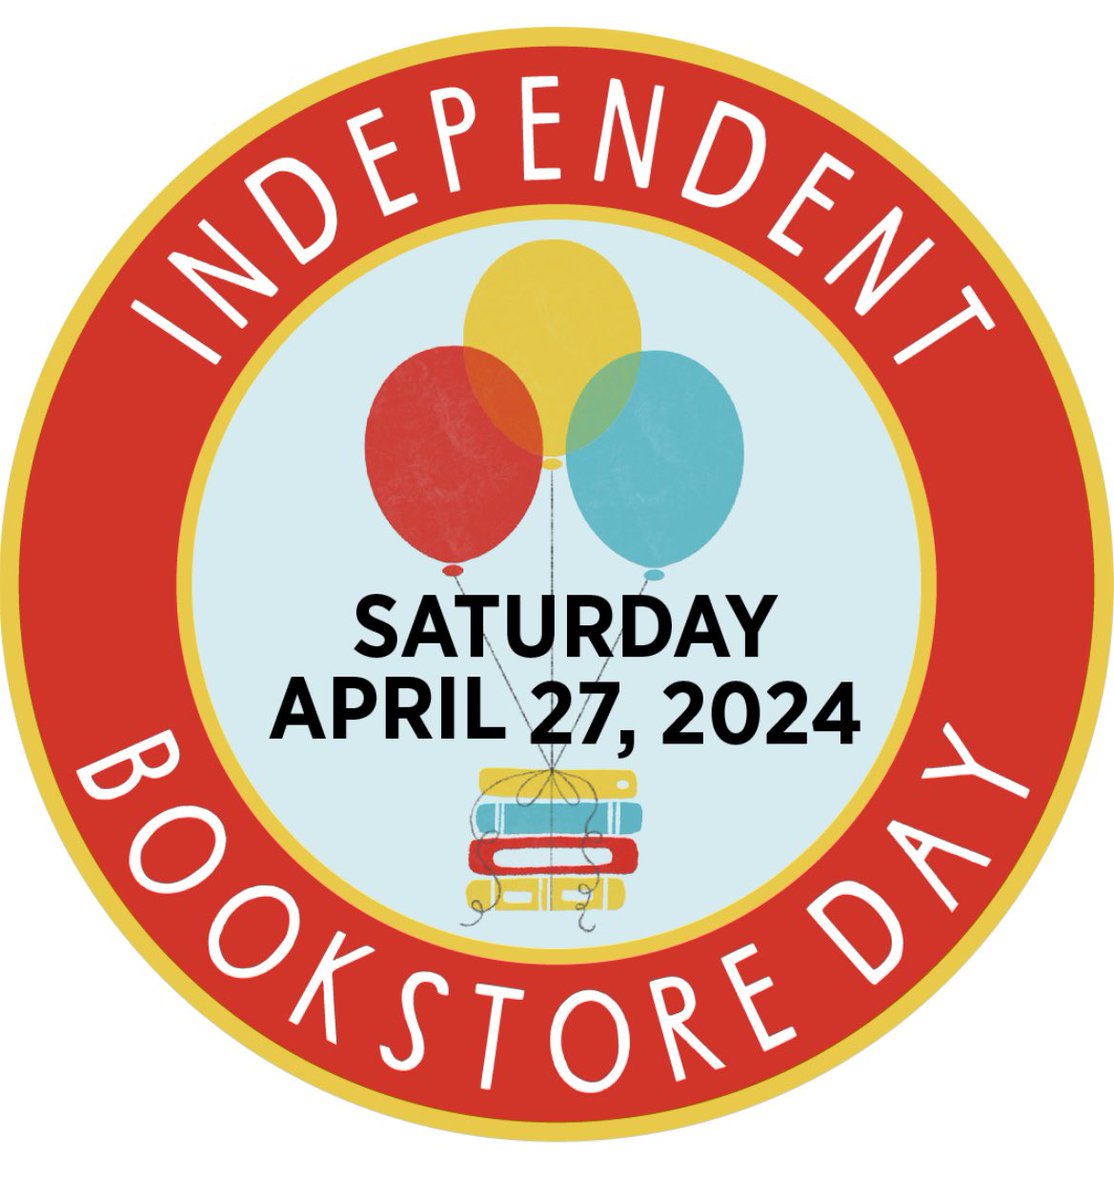 Happy Independent Bookstore Day! Shout-out to all of the bookstores that have shown my books/me so much love. Too many stores to name! Thank you! #vangpoet #vantastic #vanggarrett @KindredBookshop @blackpearlbooks @BookPeople @SecondStarBooks @BrazosBookstore @carmichaelsbook